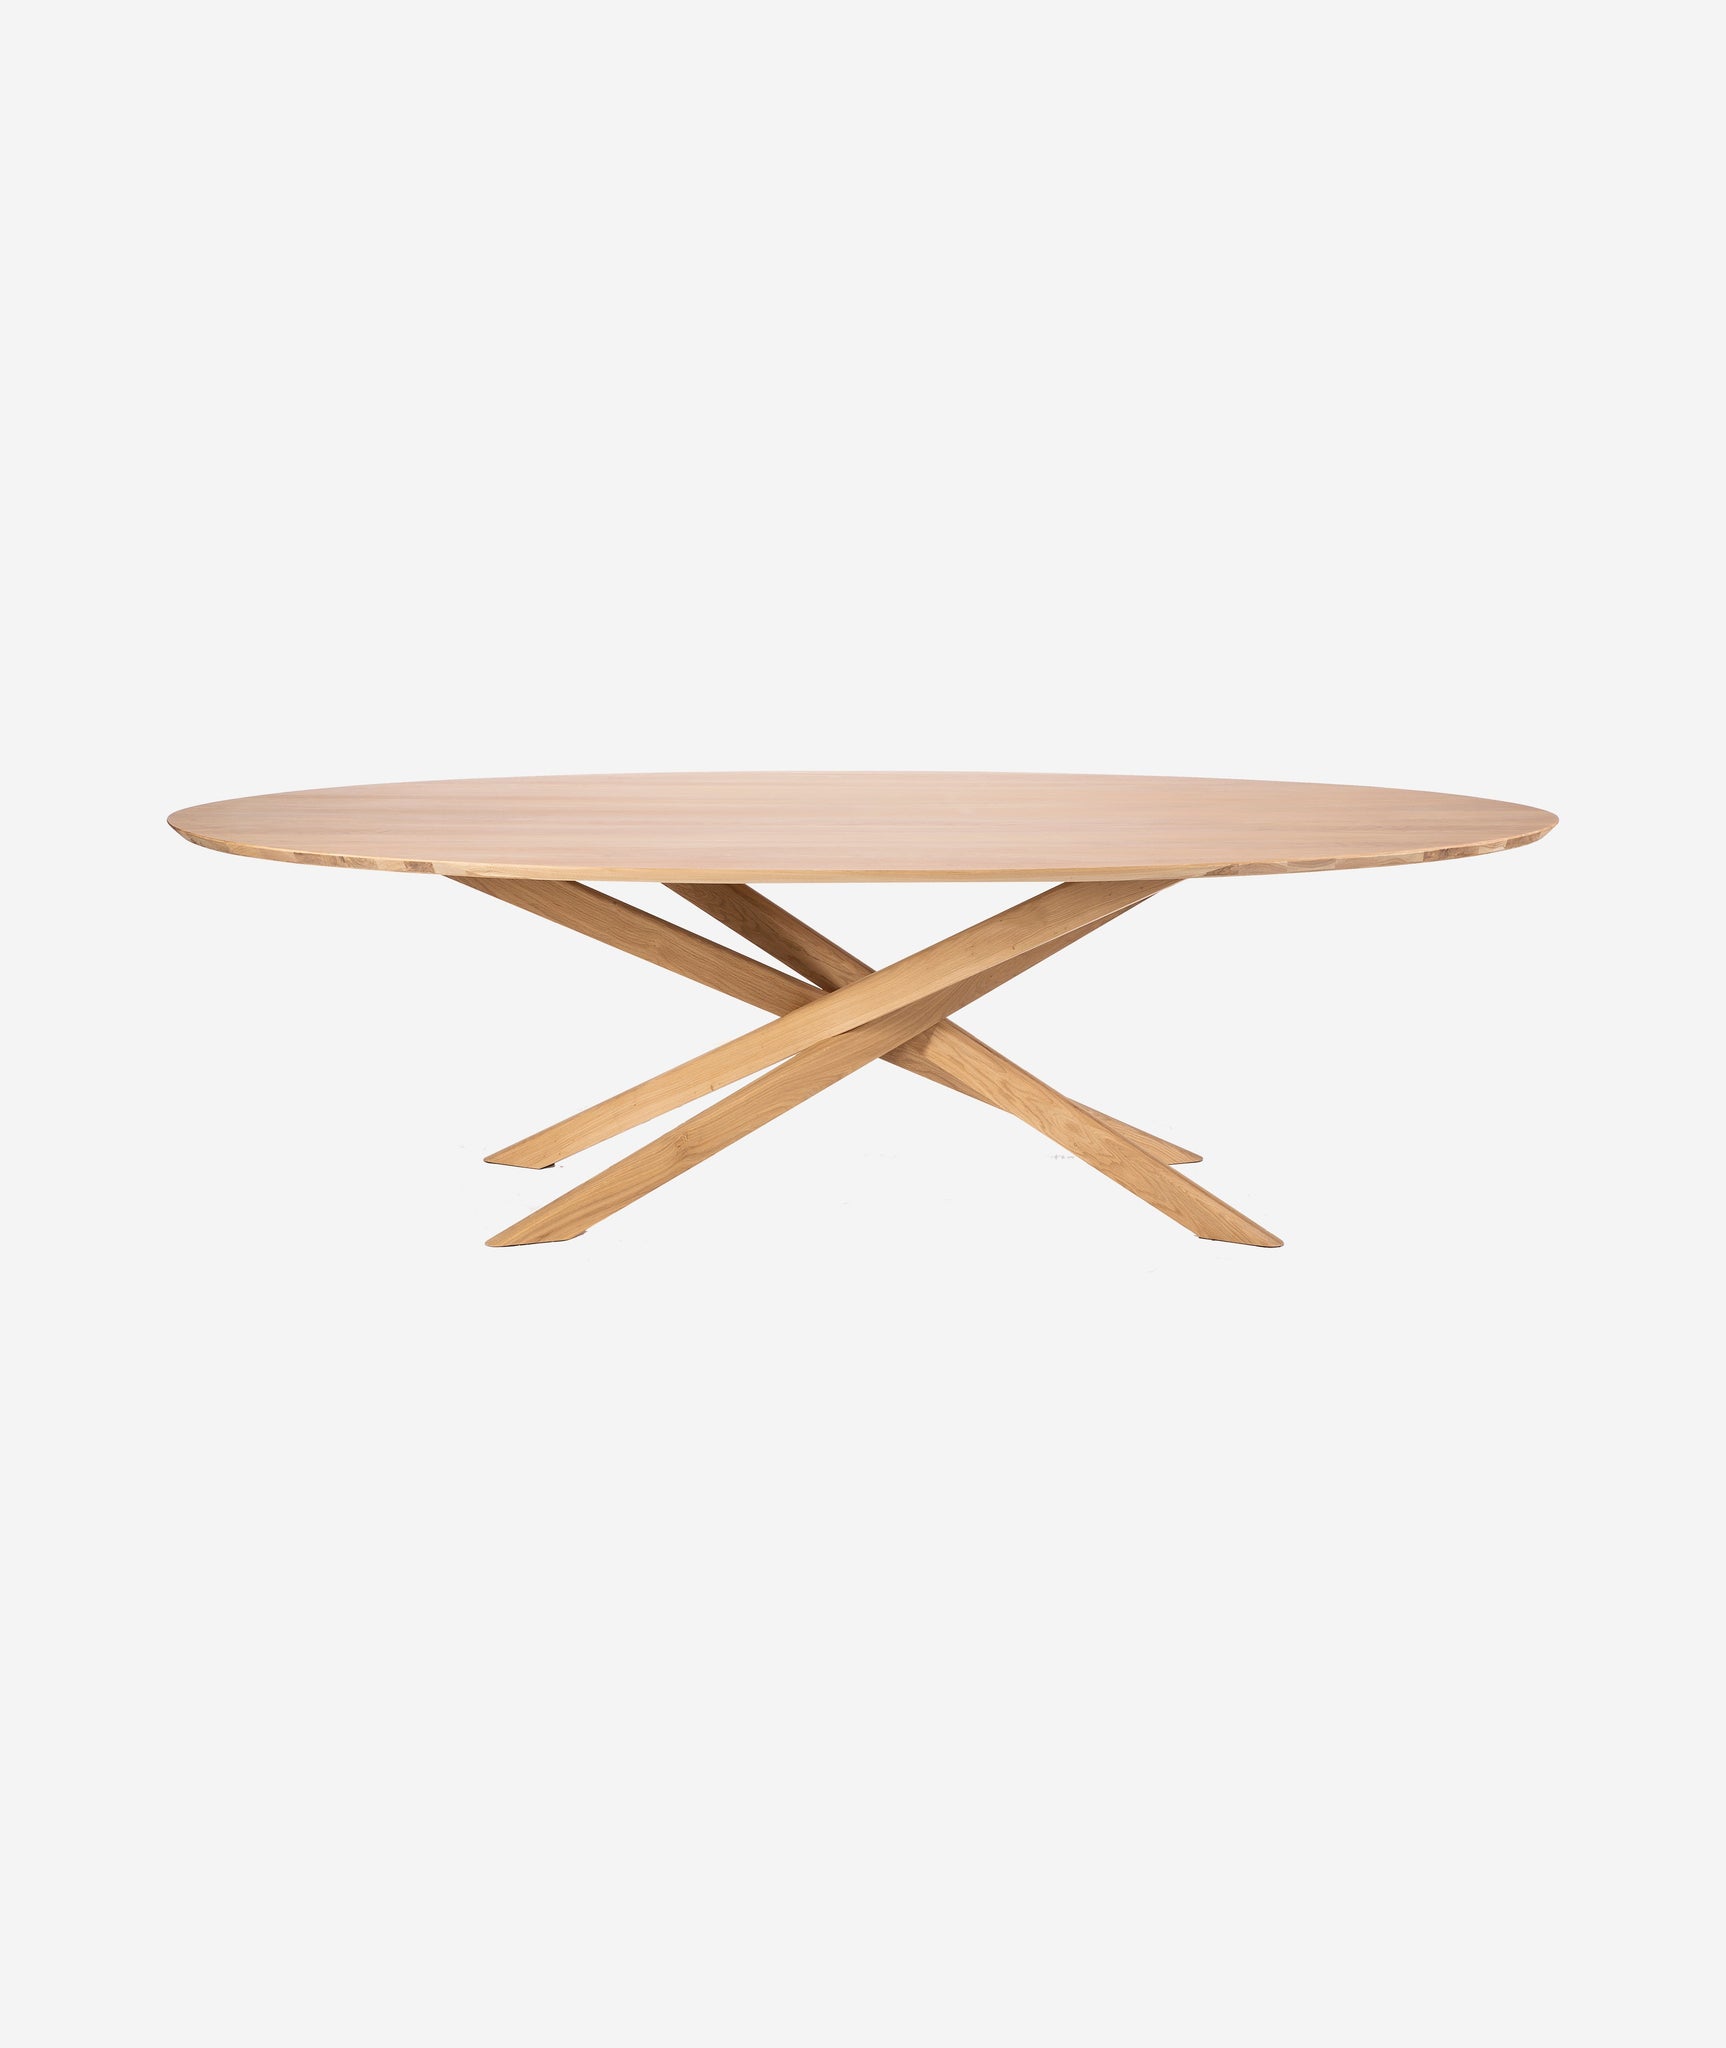 Mikado Oval Dining Table - More Options